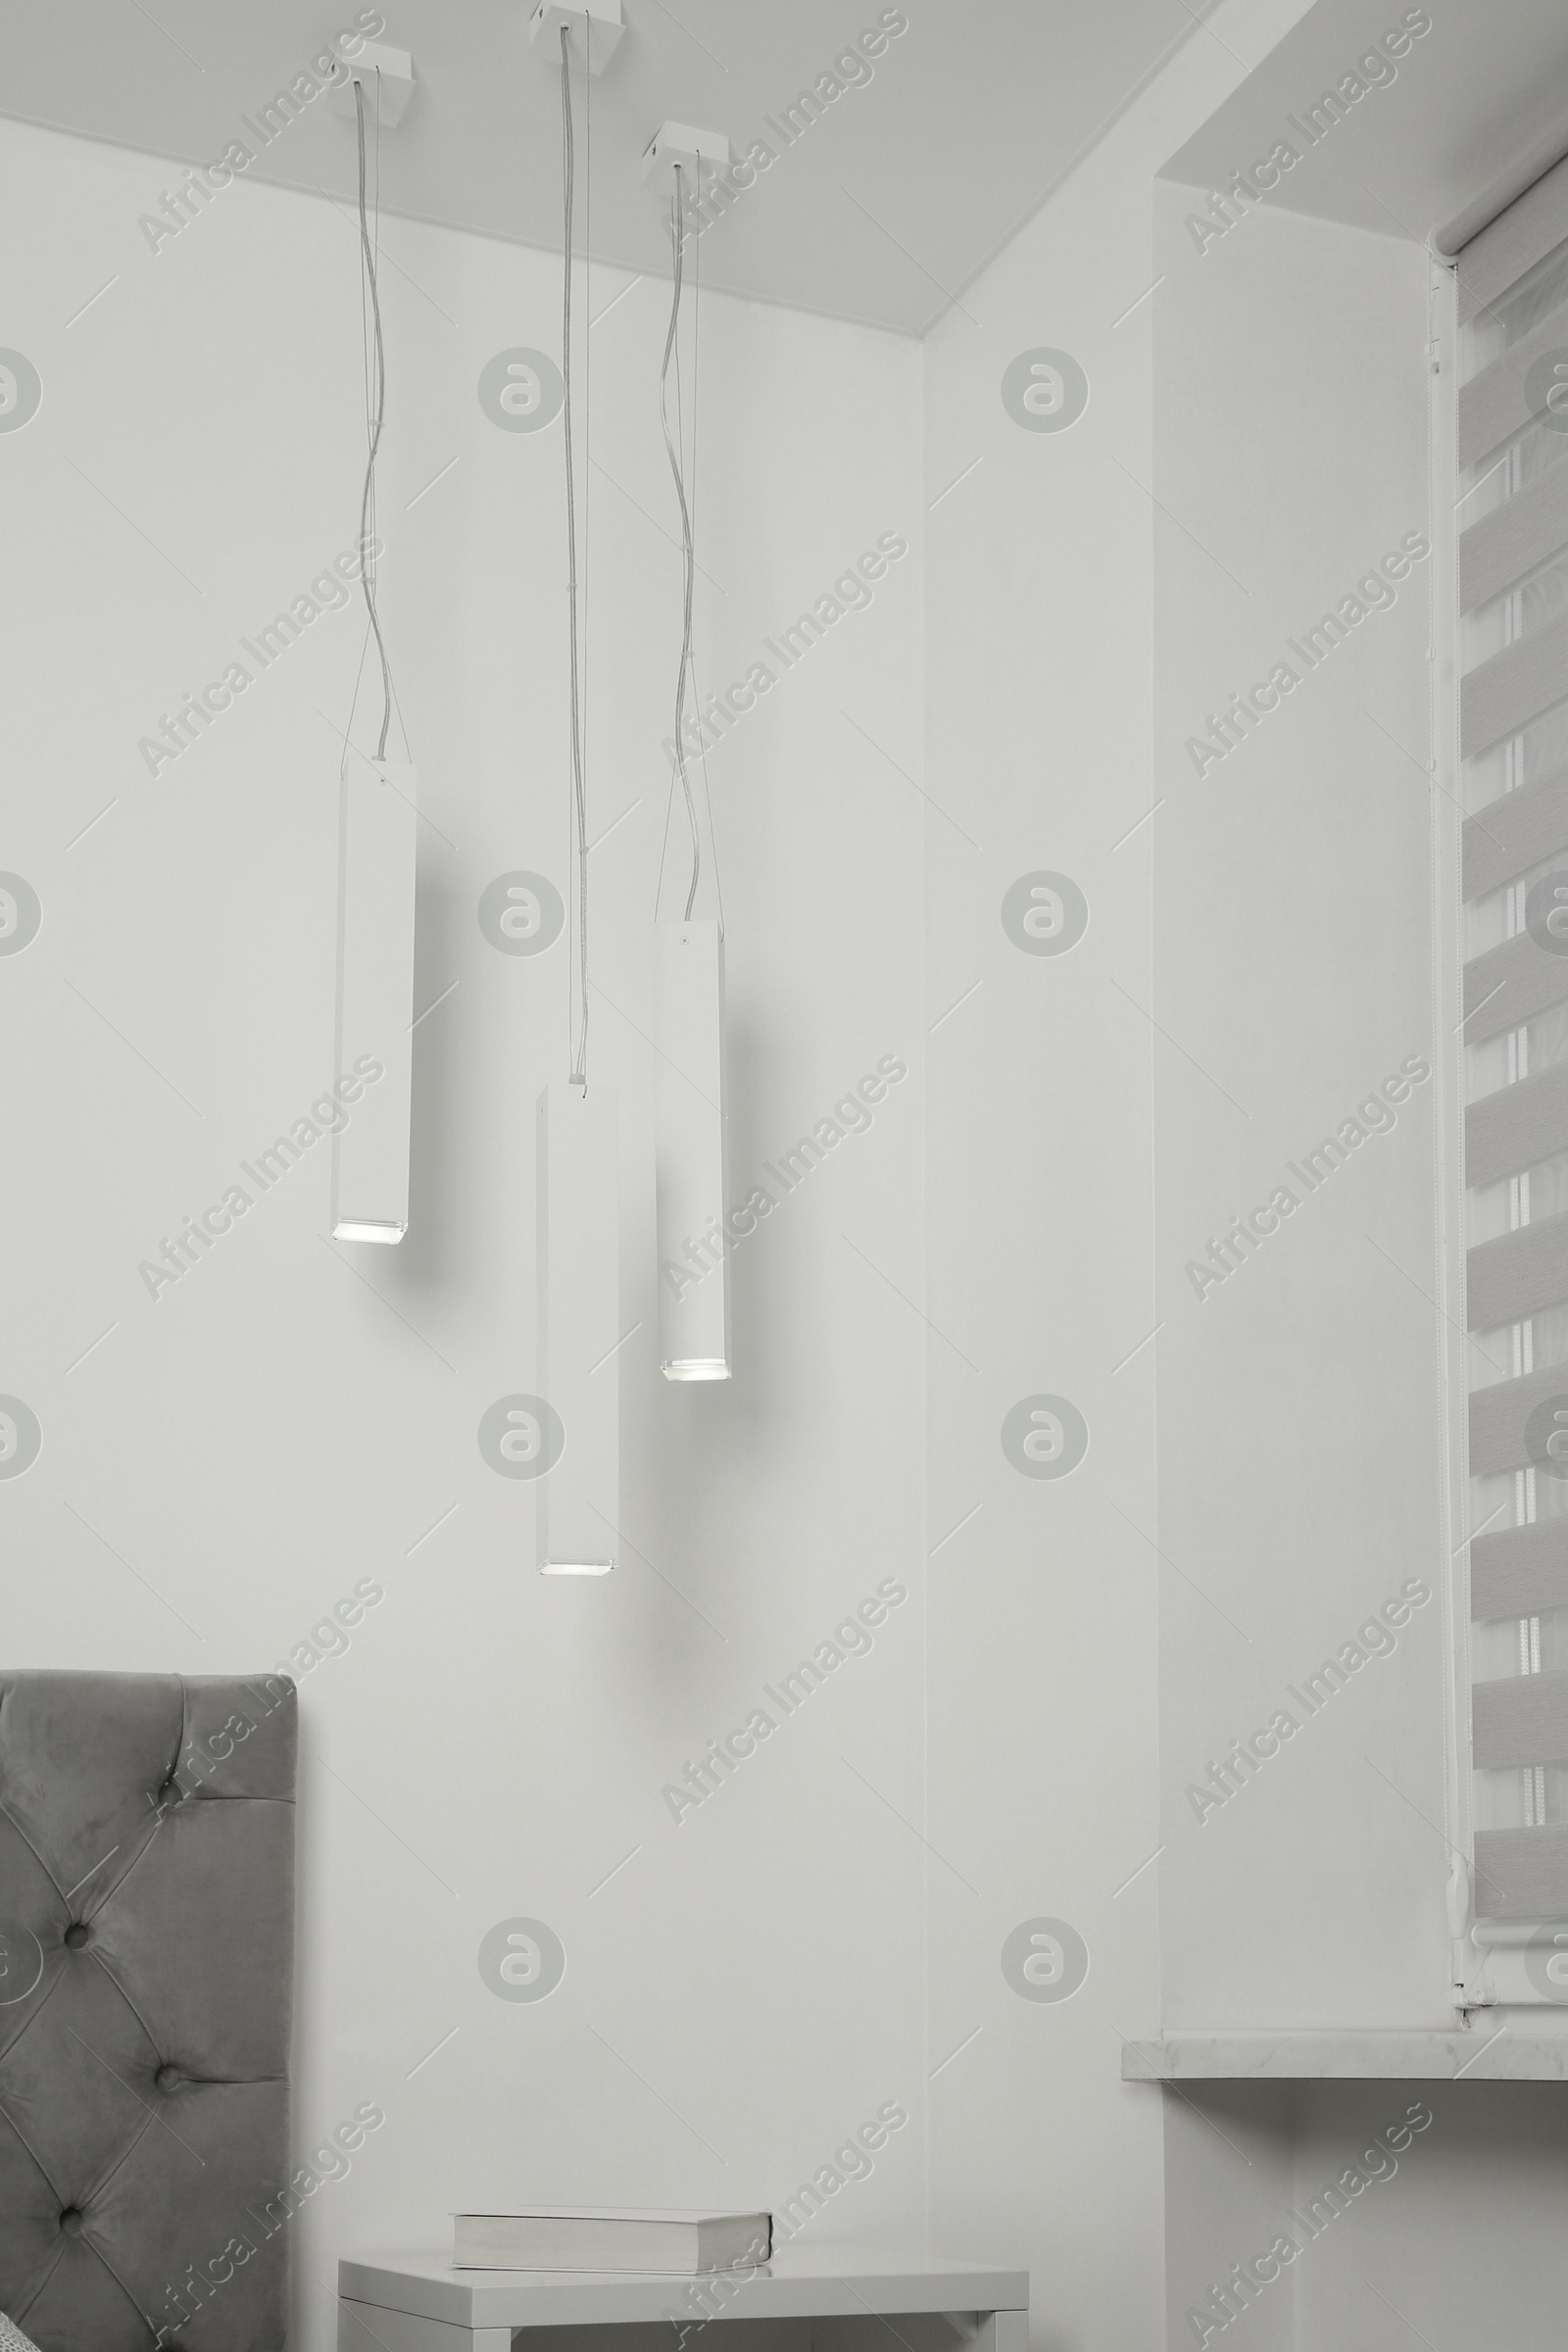 Photo of Stylish pendant lamps hanging over nightstand in light room